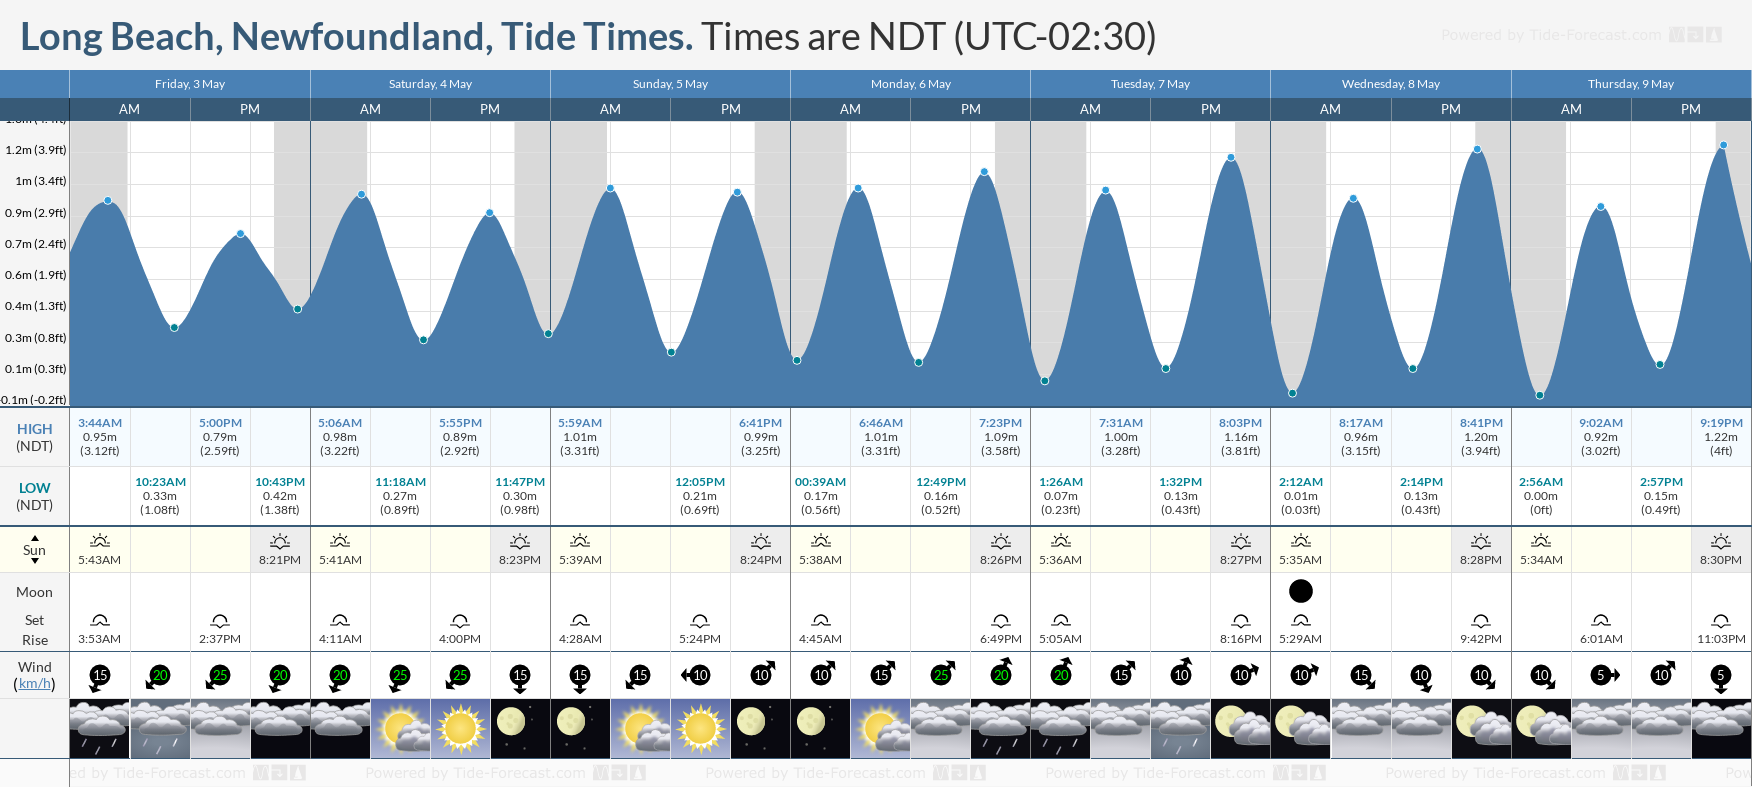 Long Beach, Newfoundland Tide Chart including high and low tide tide times for the next 7 days